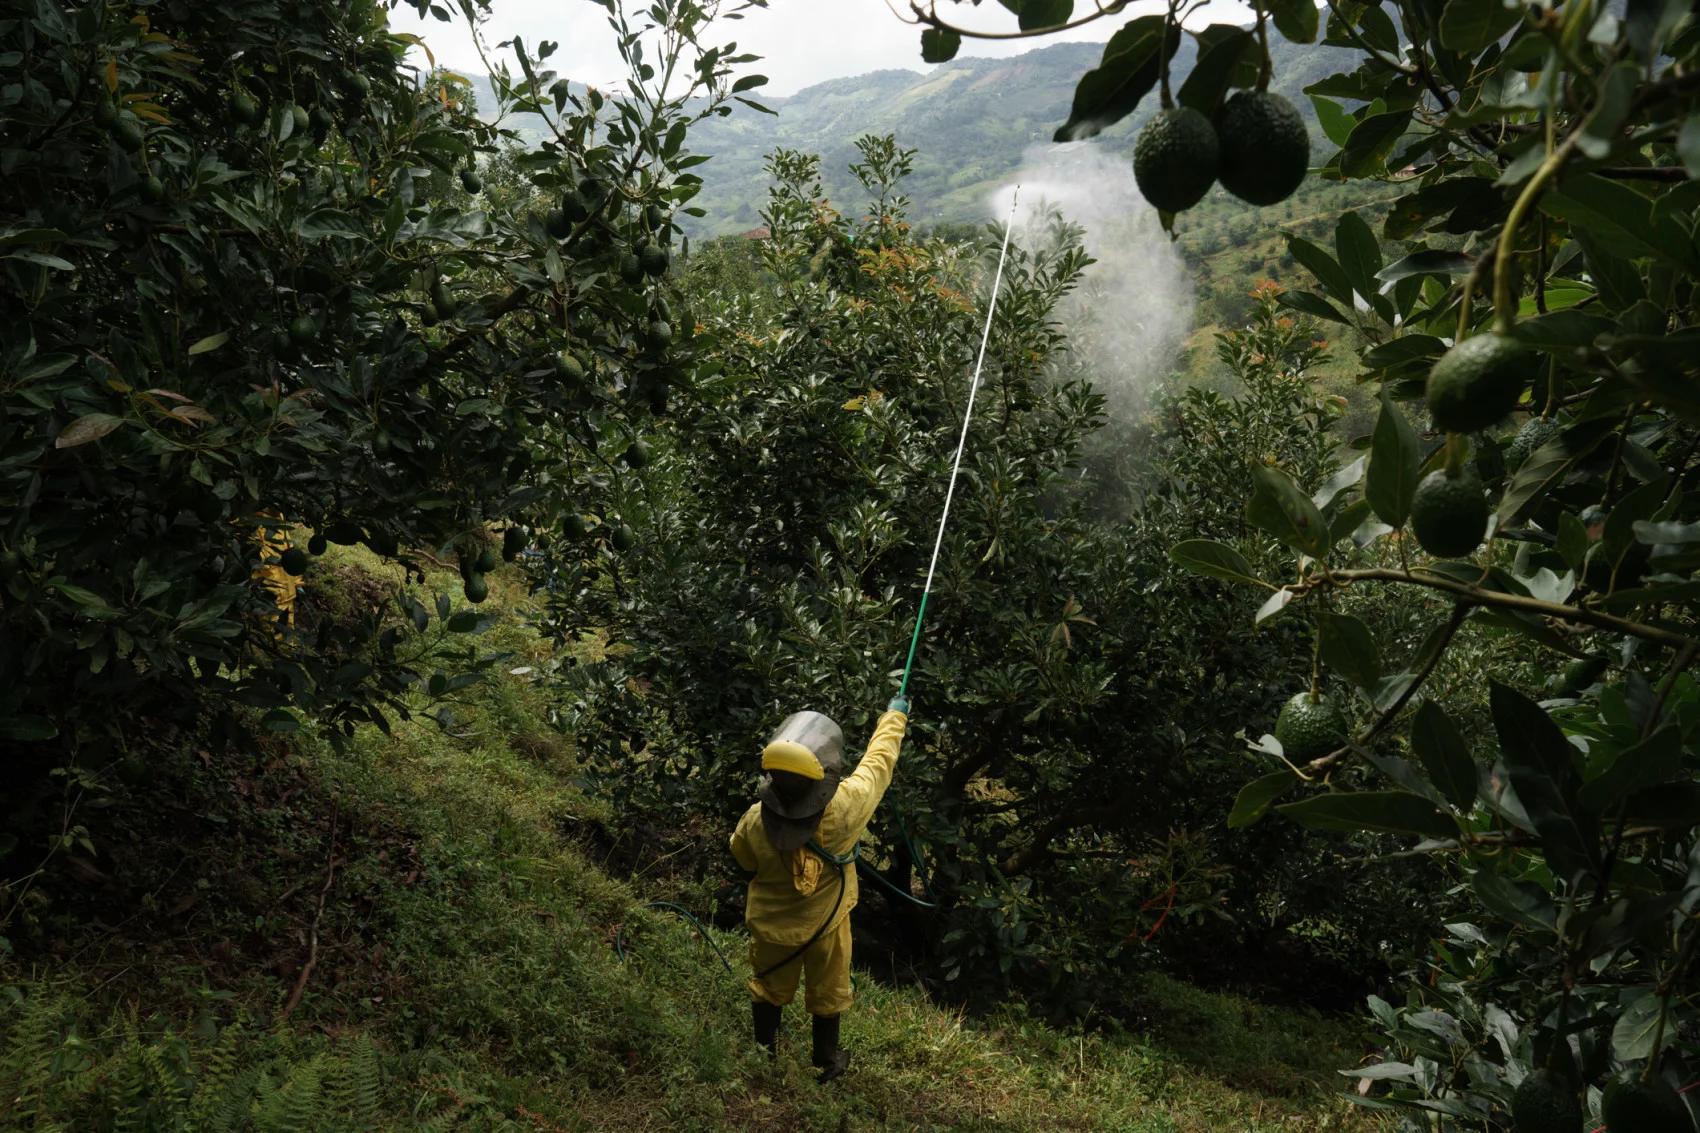 A worker fumigates avocado trees in Colombia to protect them from mites, a requirement for exports. (Mariana Greif Etchebehere/ Bloomberg/ Getty Images)